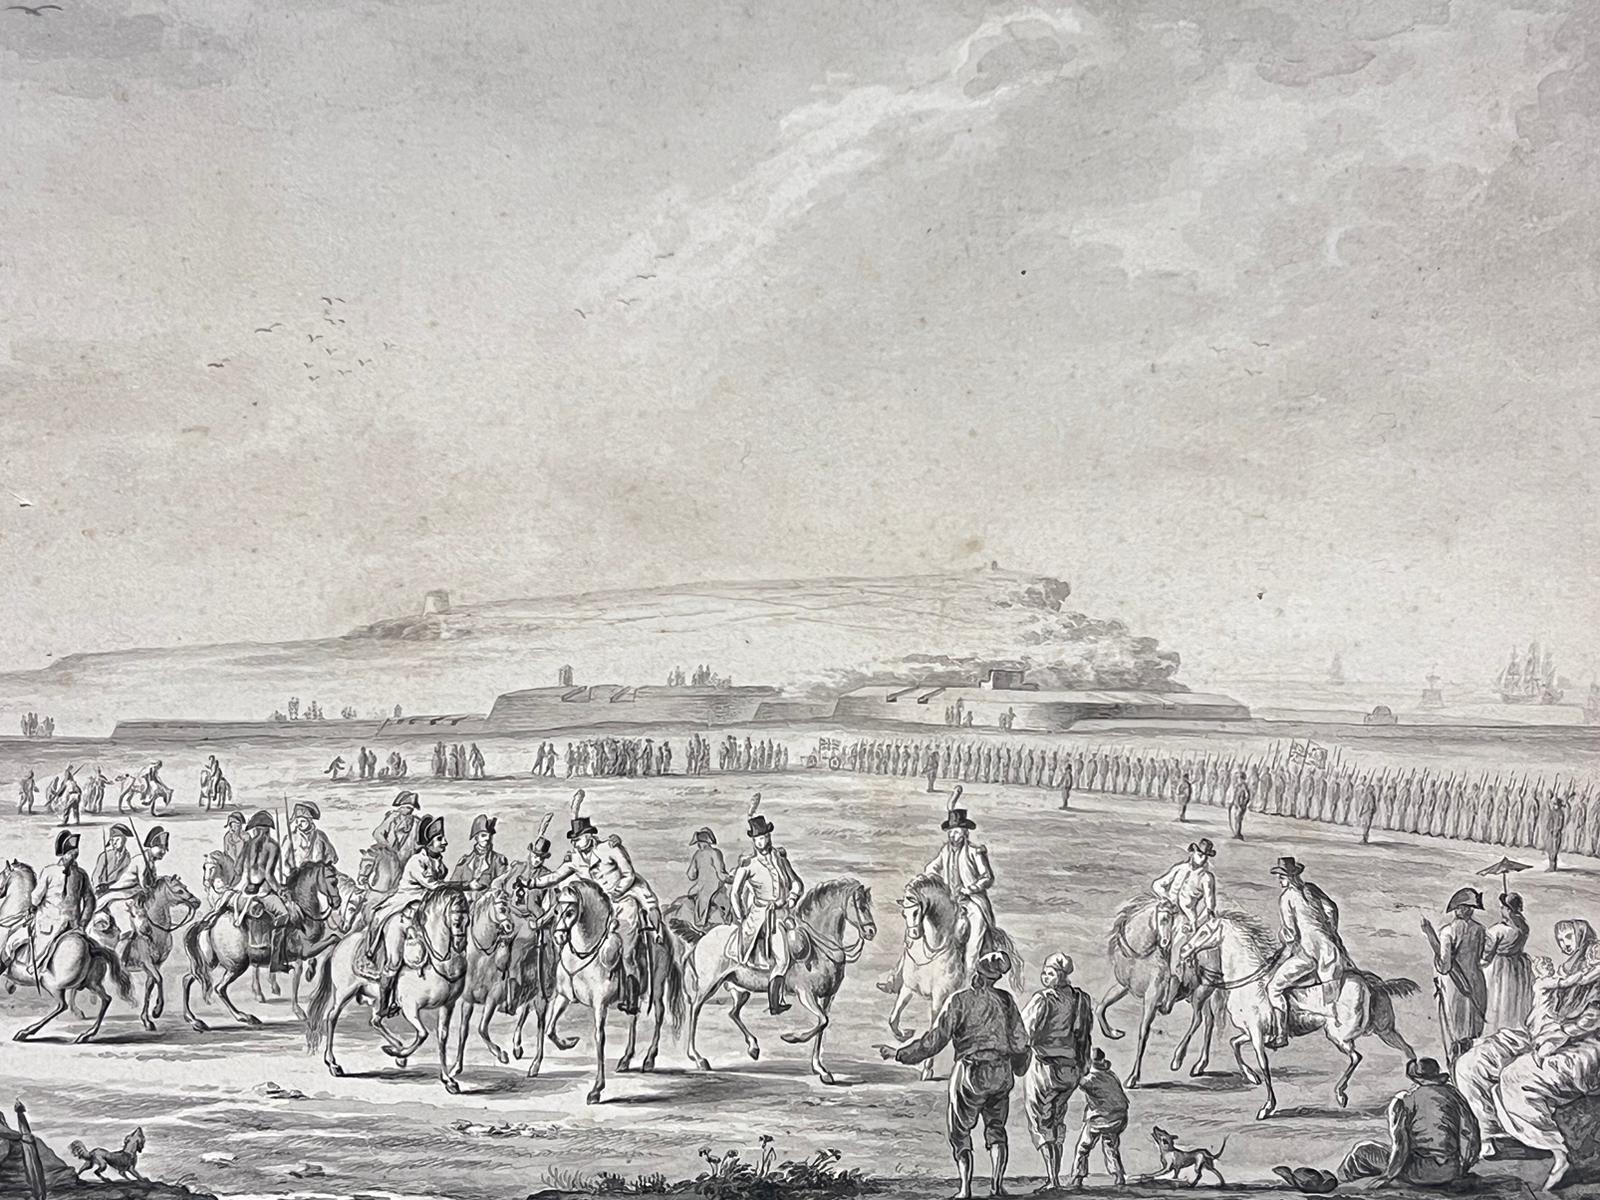 Officers on horseback with infantry on parade
Circle of Dirk Langendijk (Dutch 1748-1805) *see below
watercolour on paper mounted in frame
frame: 21 x 29 inches
board: 10 x 16 inches
provenance: private collection, UK, with Christies auction stencil